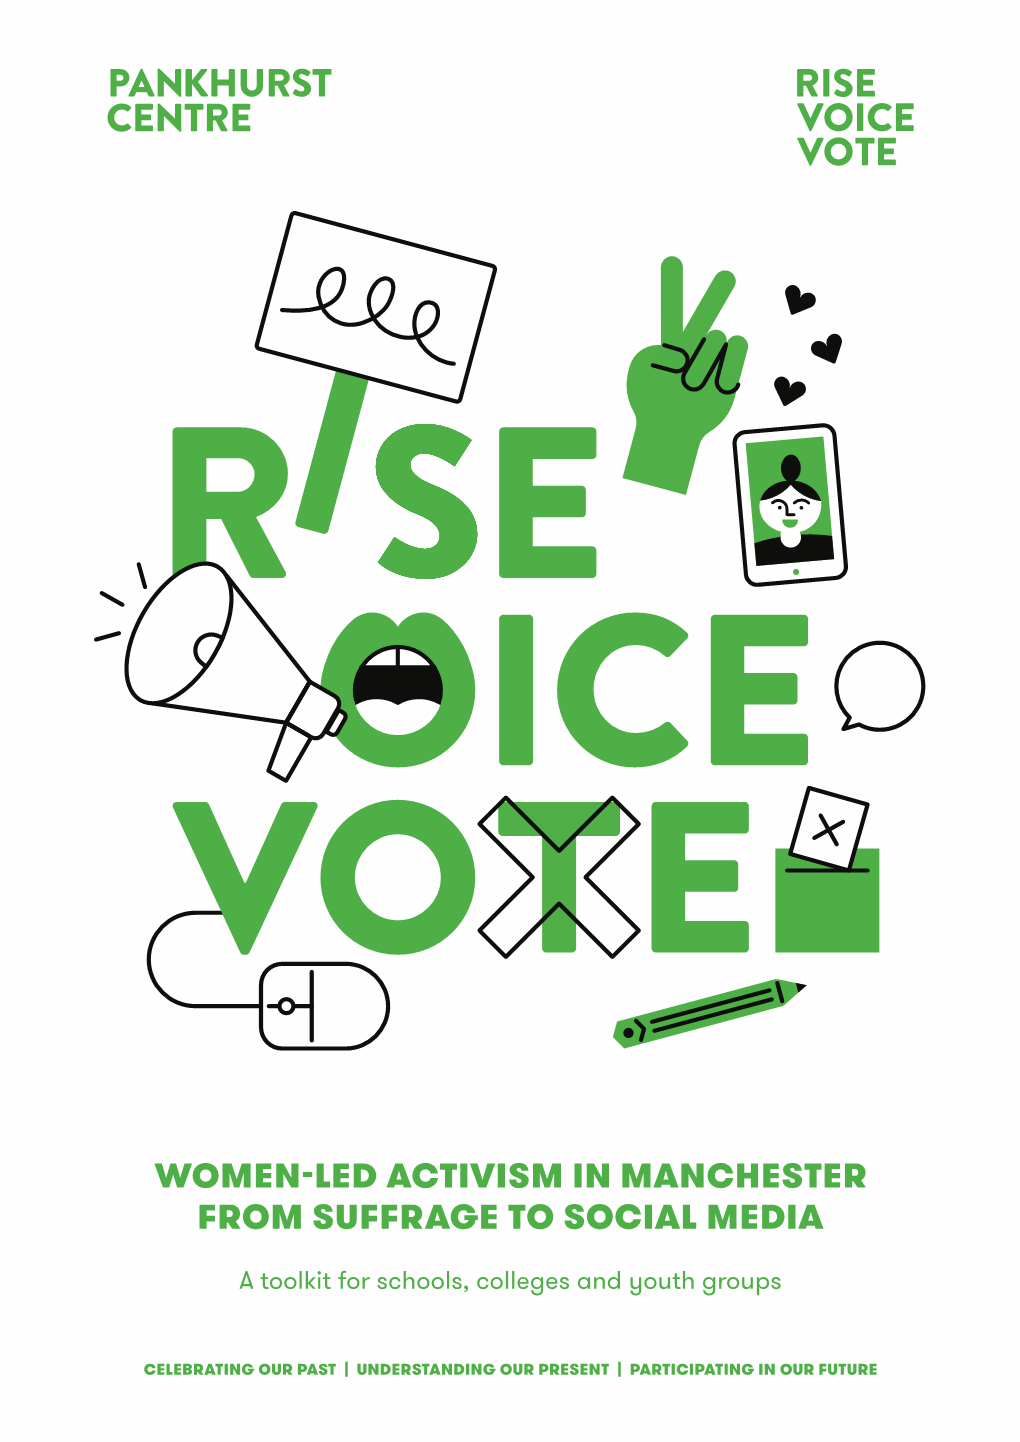 Women-Led Activism in Manchester from Suffrage to Social Media